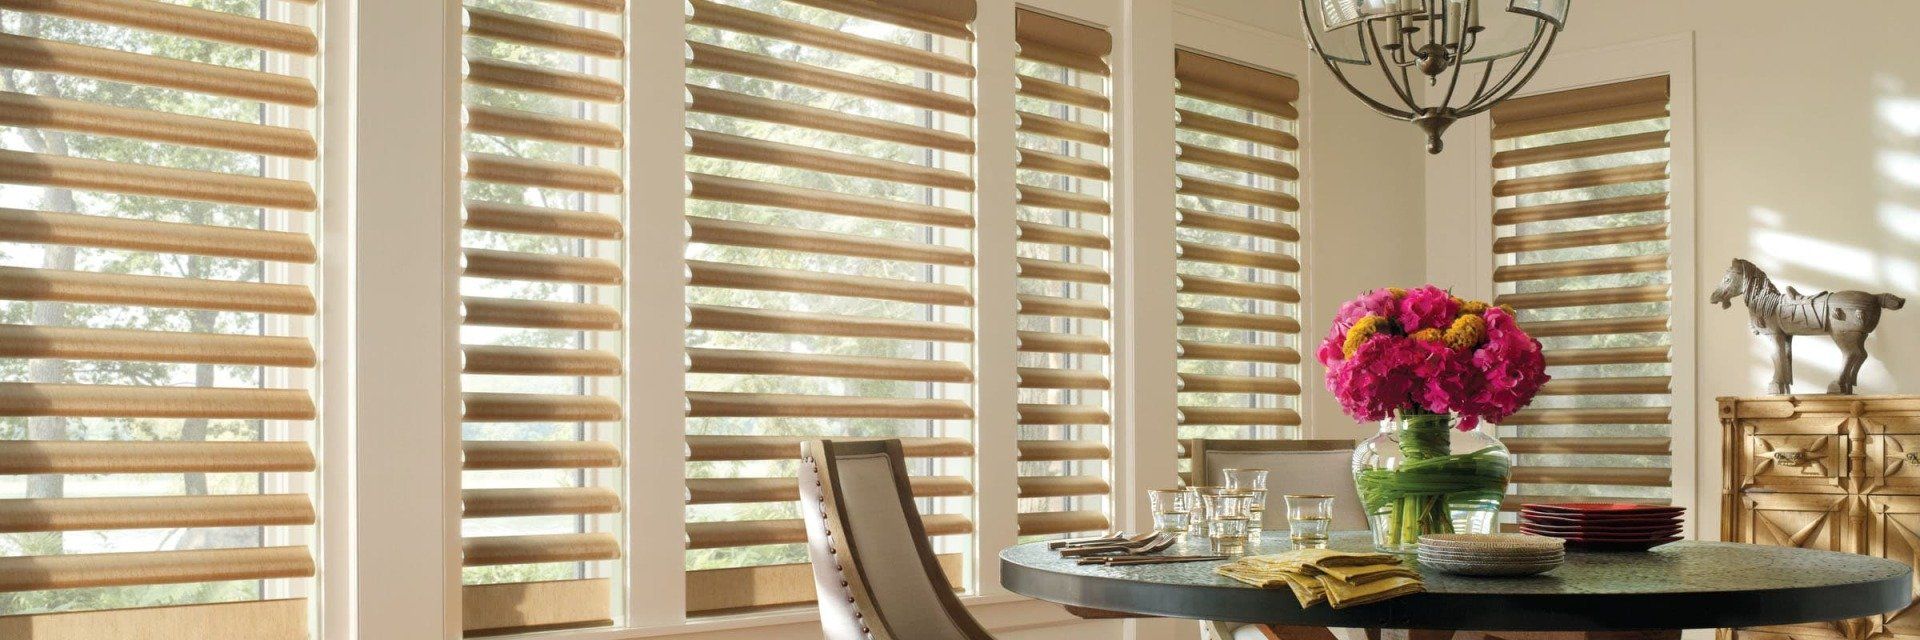 crafted wood blinds image